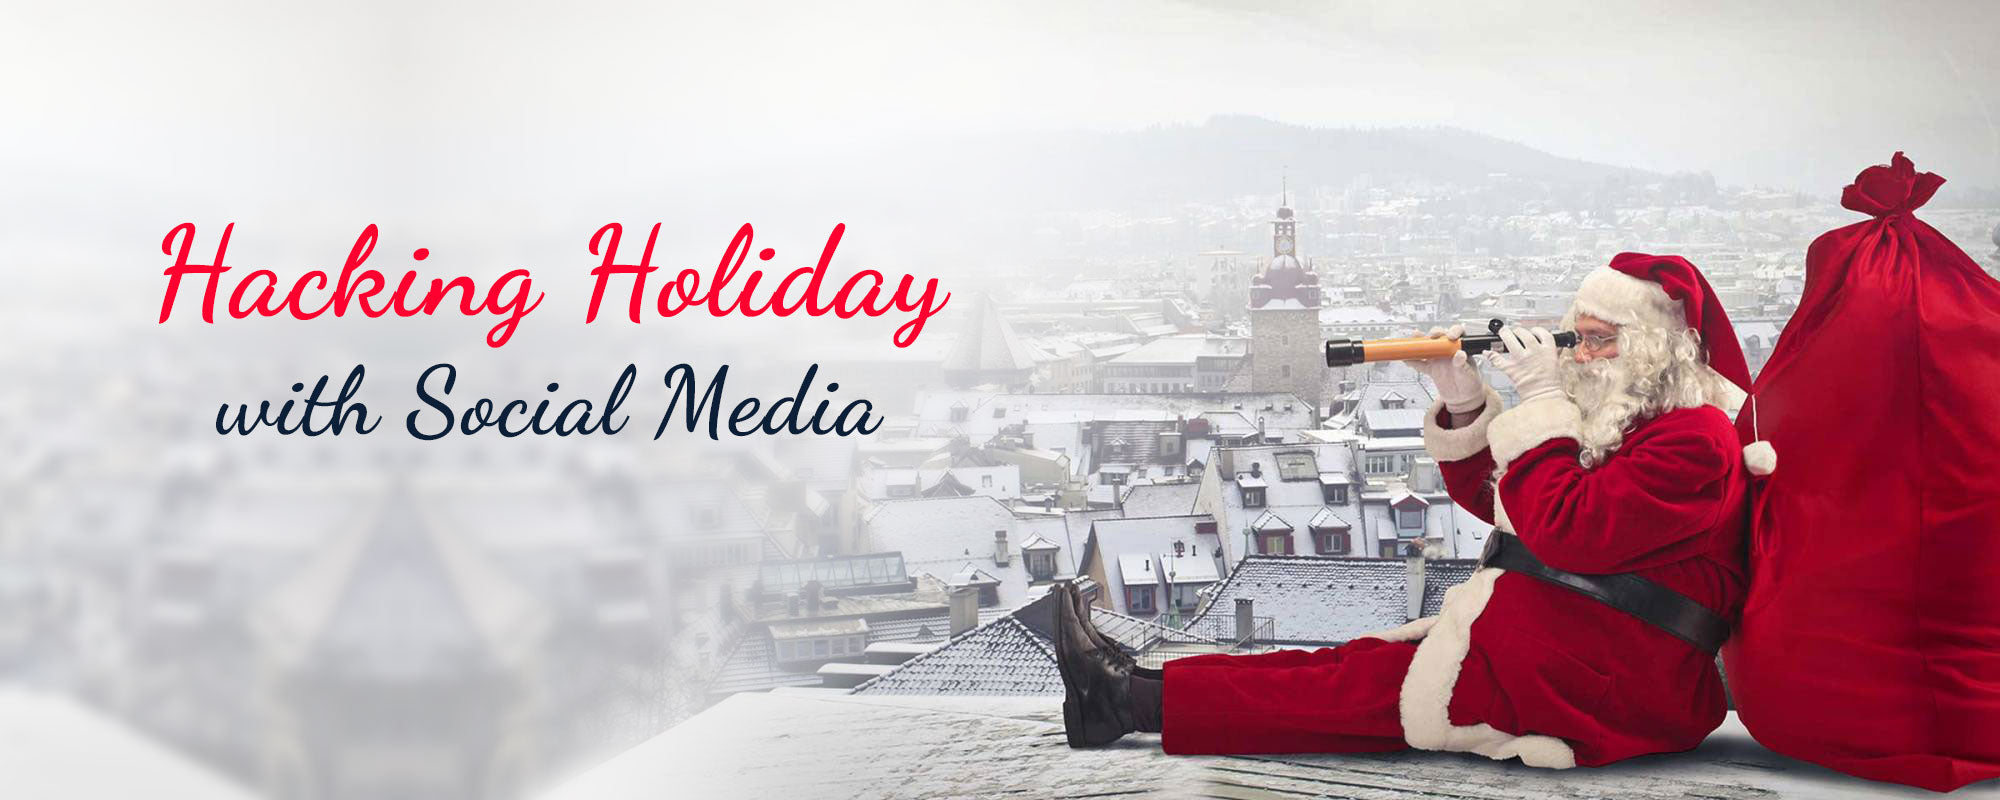 Hacking Holiday with social media